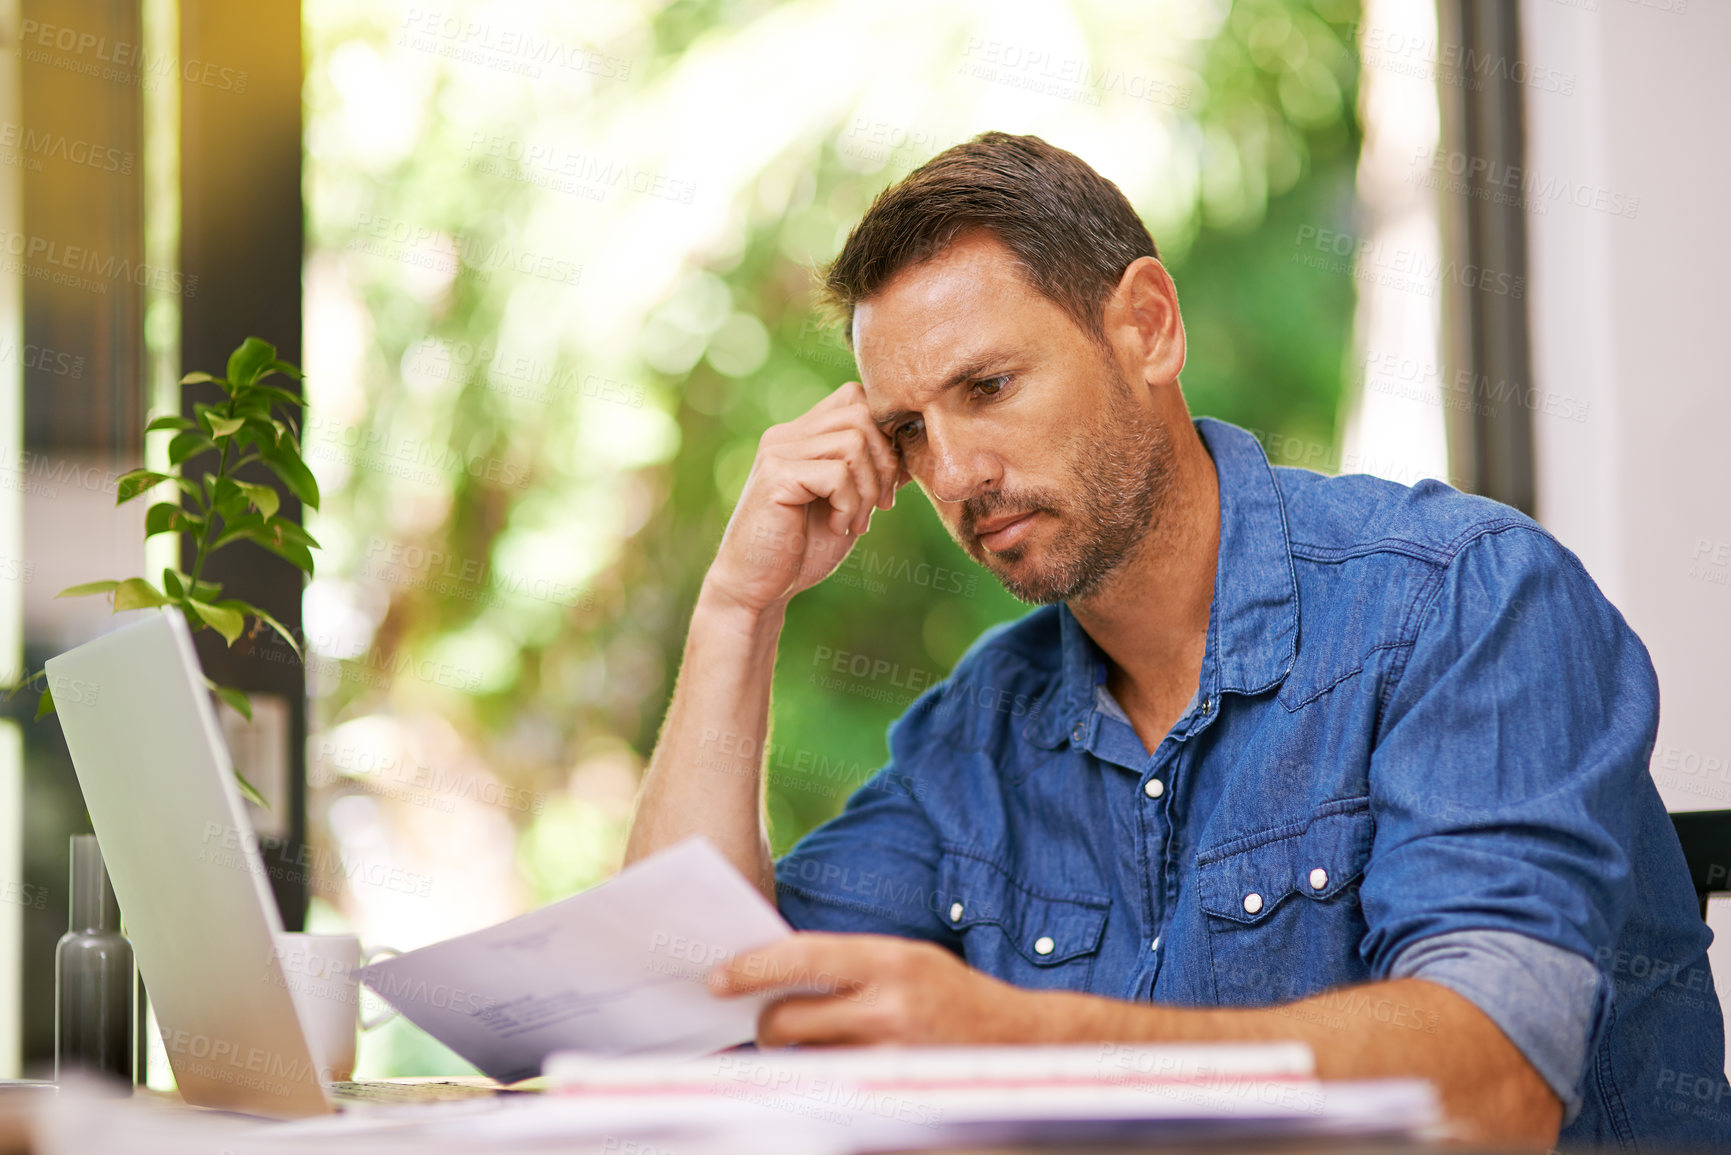 Buy stock photo Shot of a man looking over some paperwork while working from home